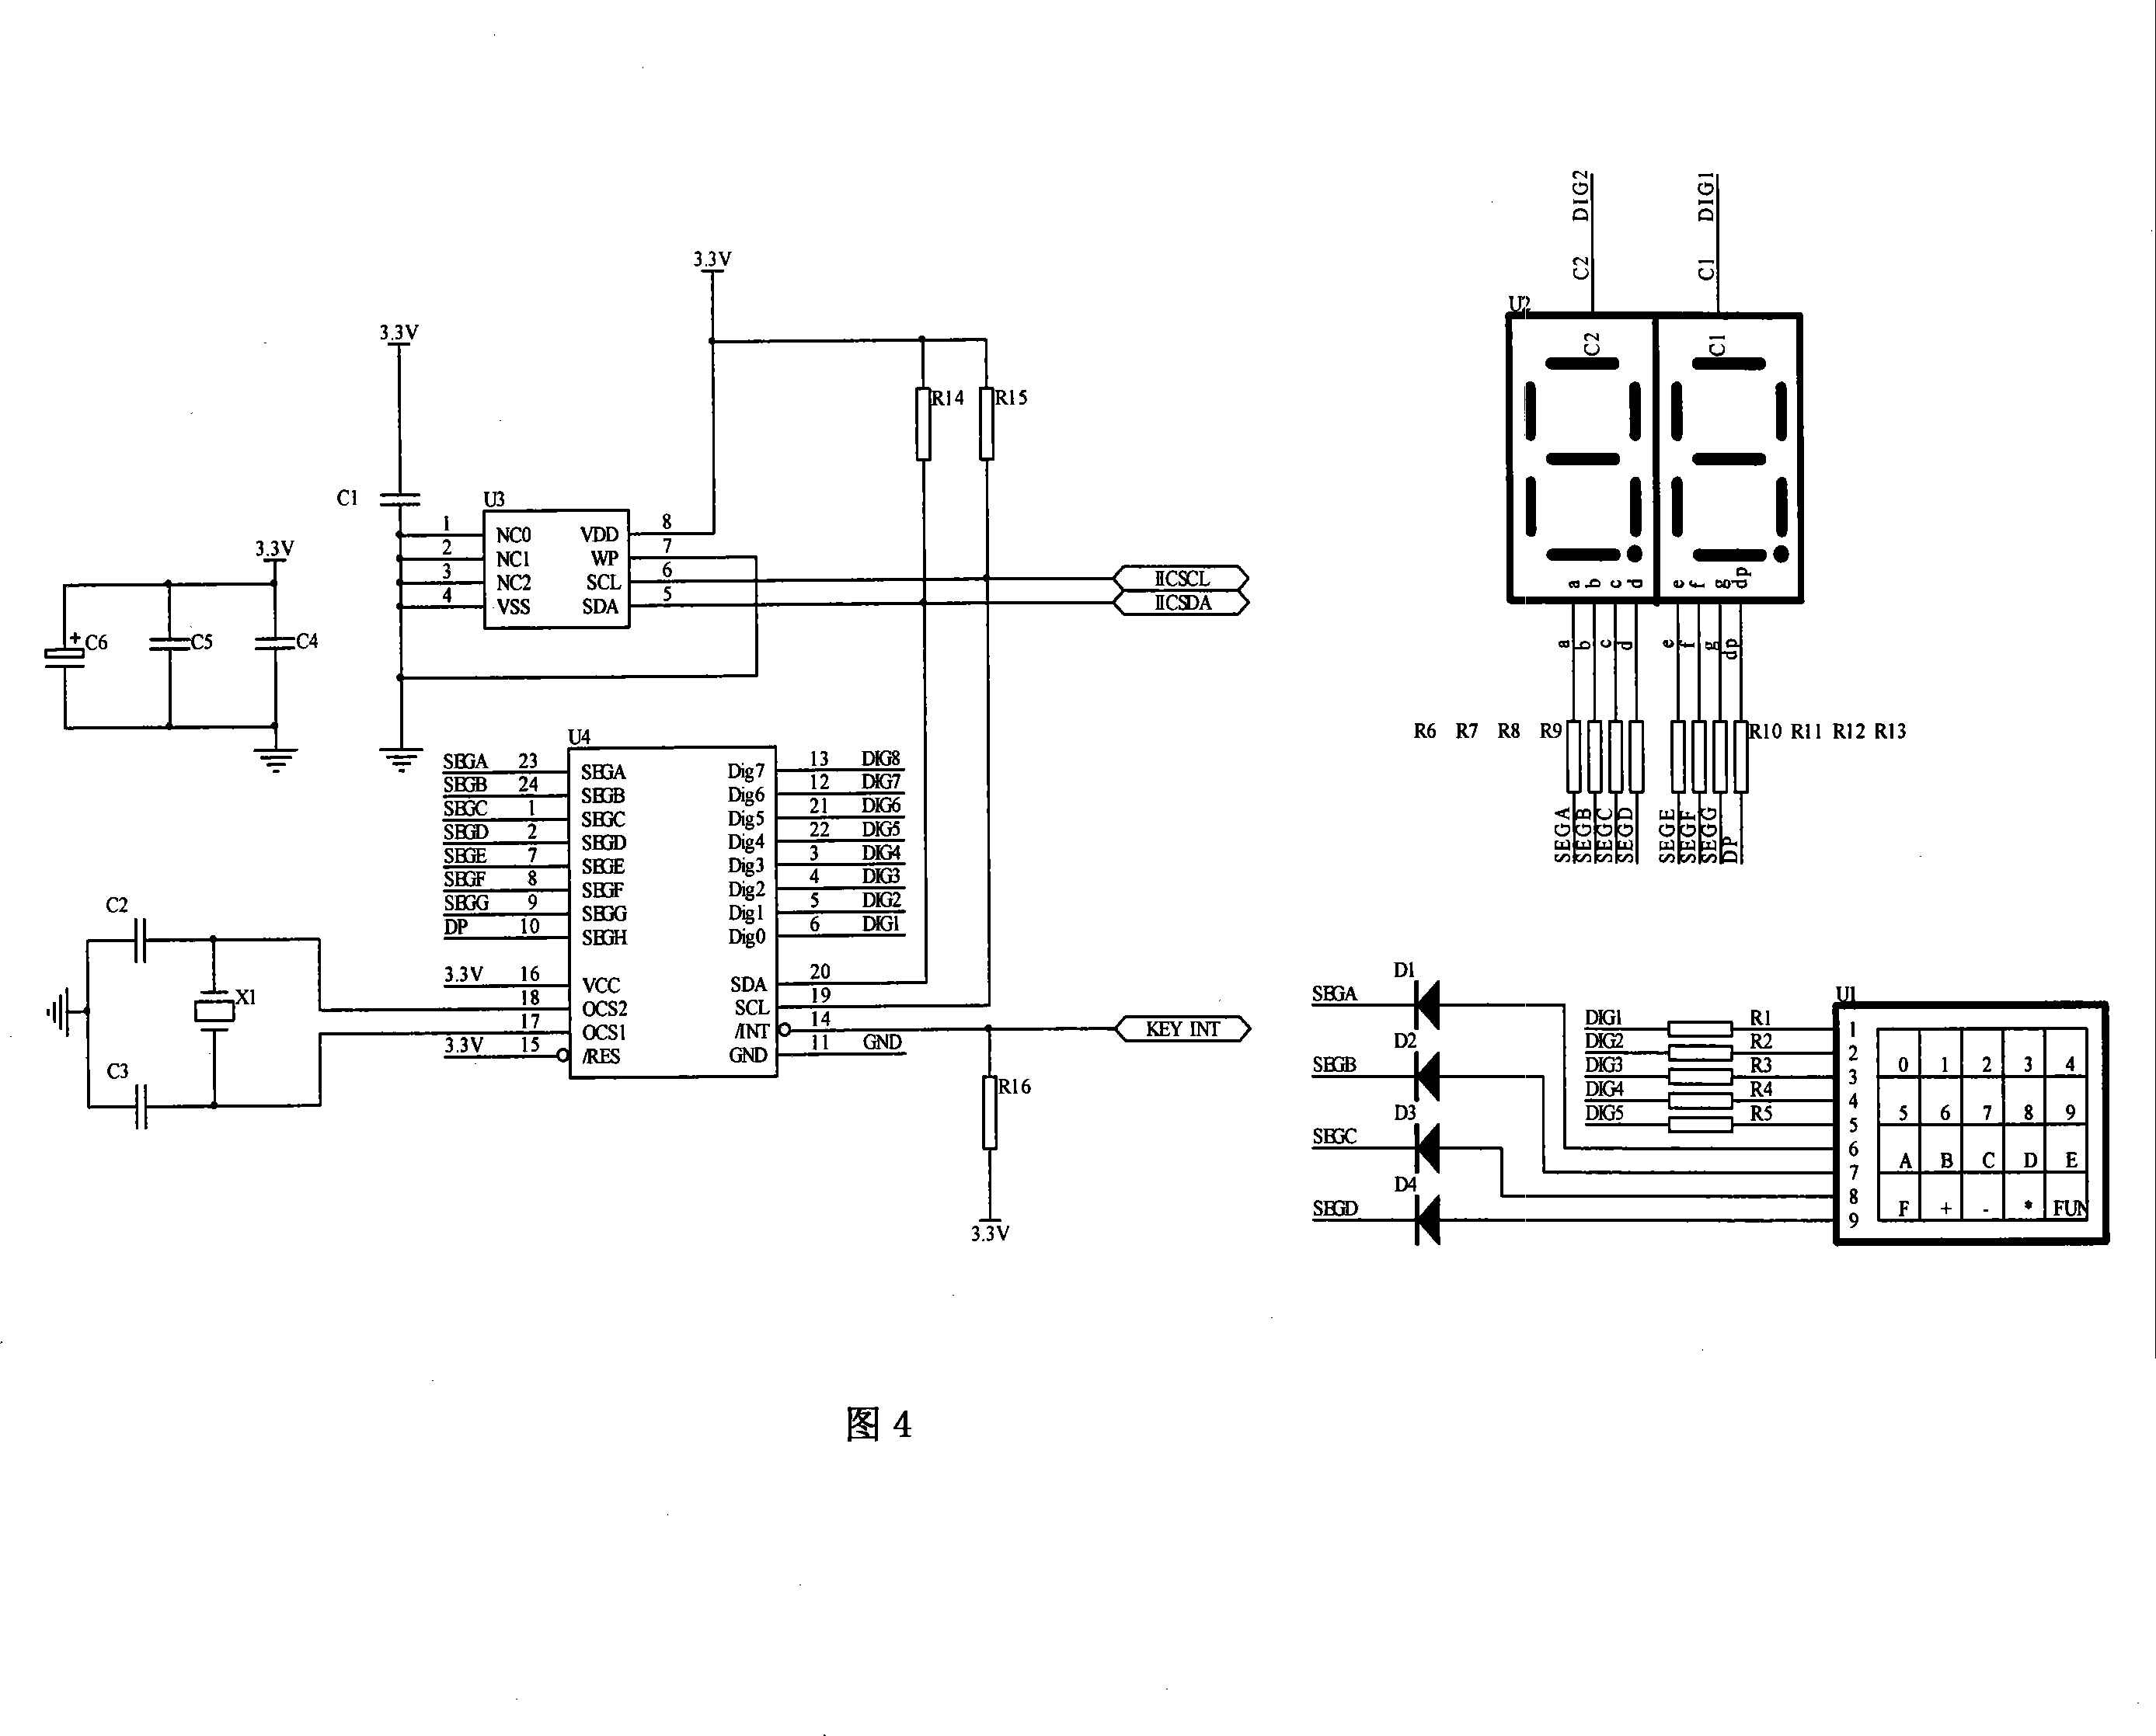 ARM-based flat wheel detection and control system